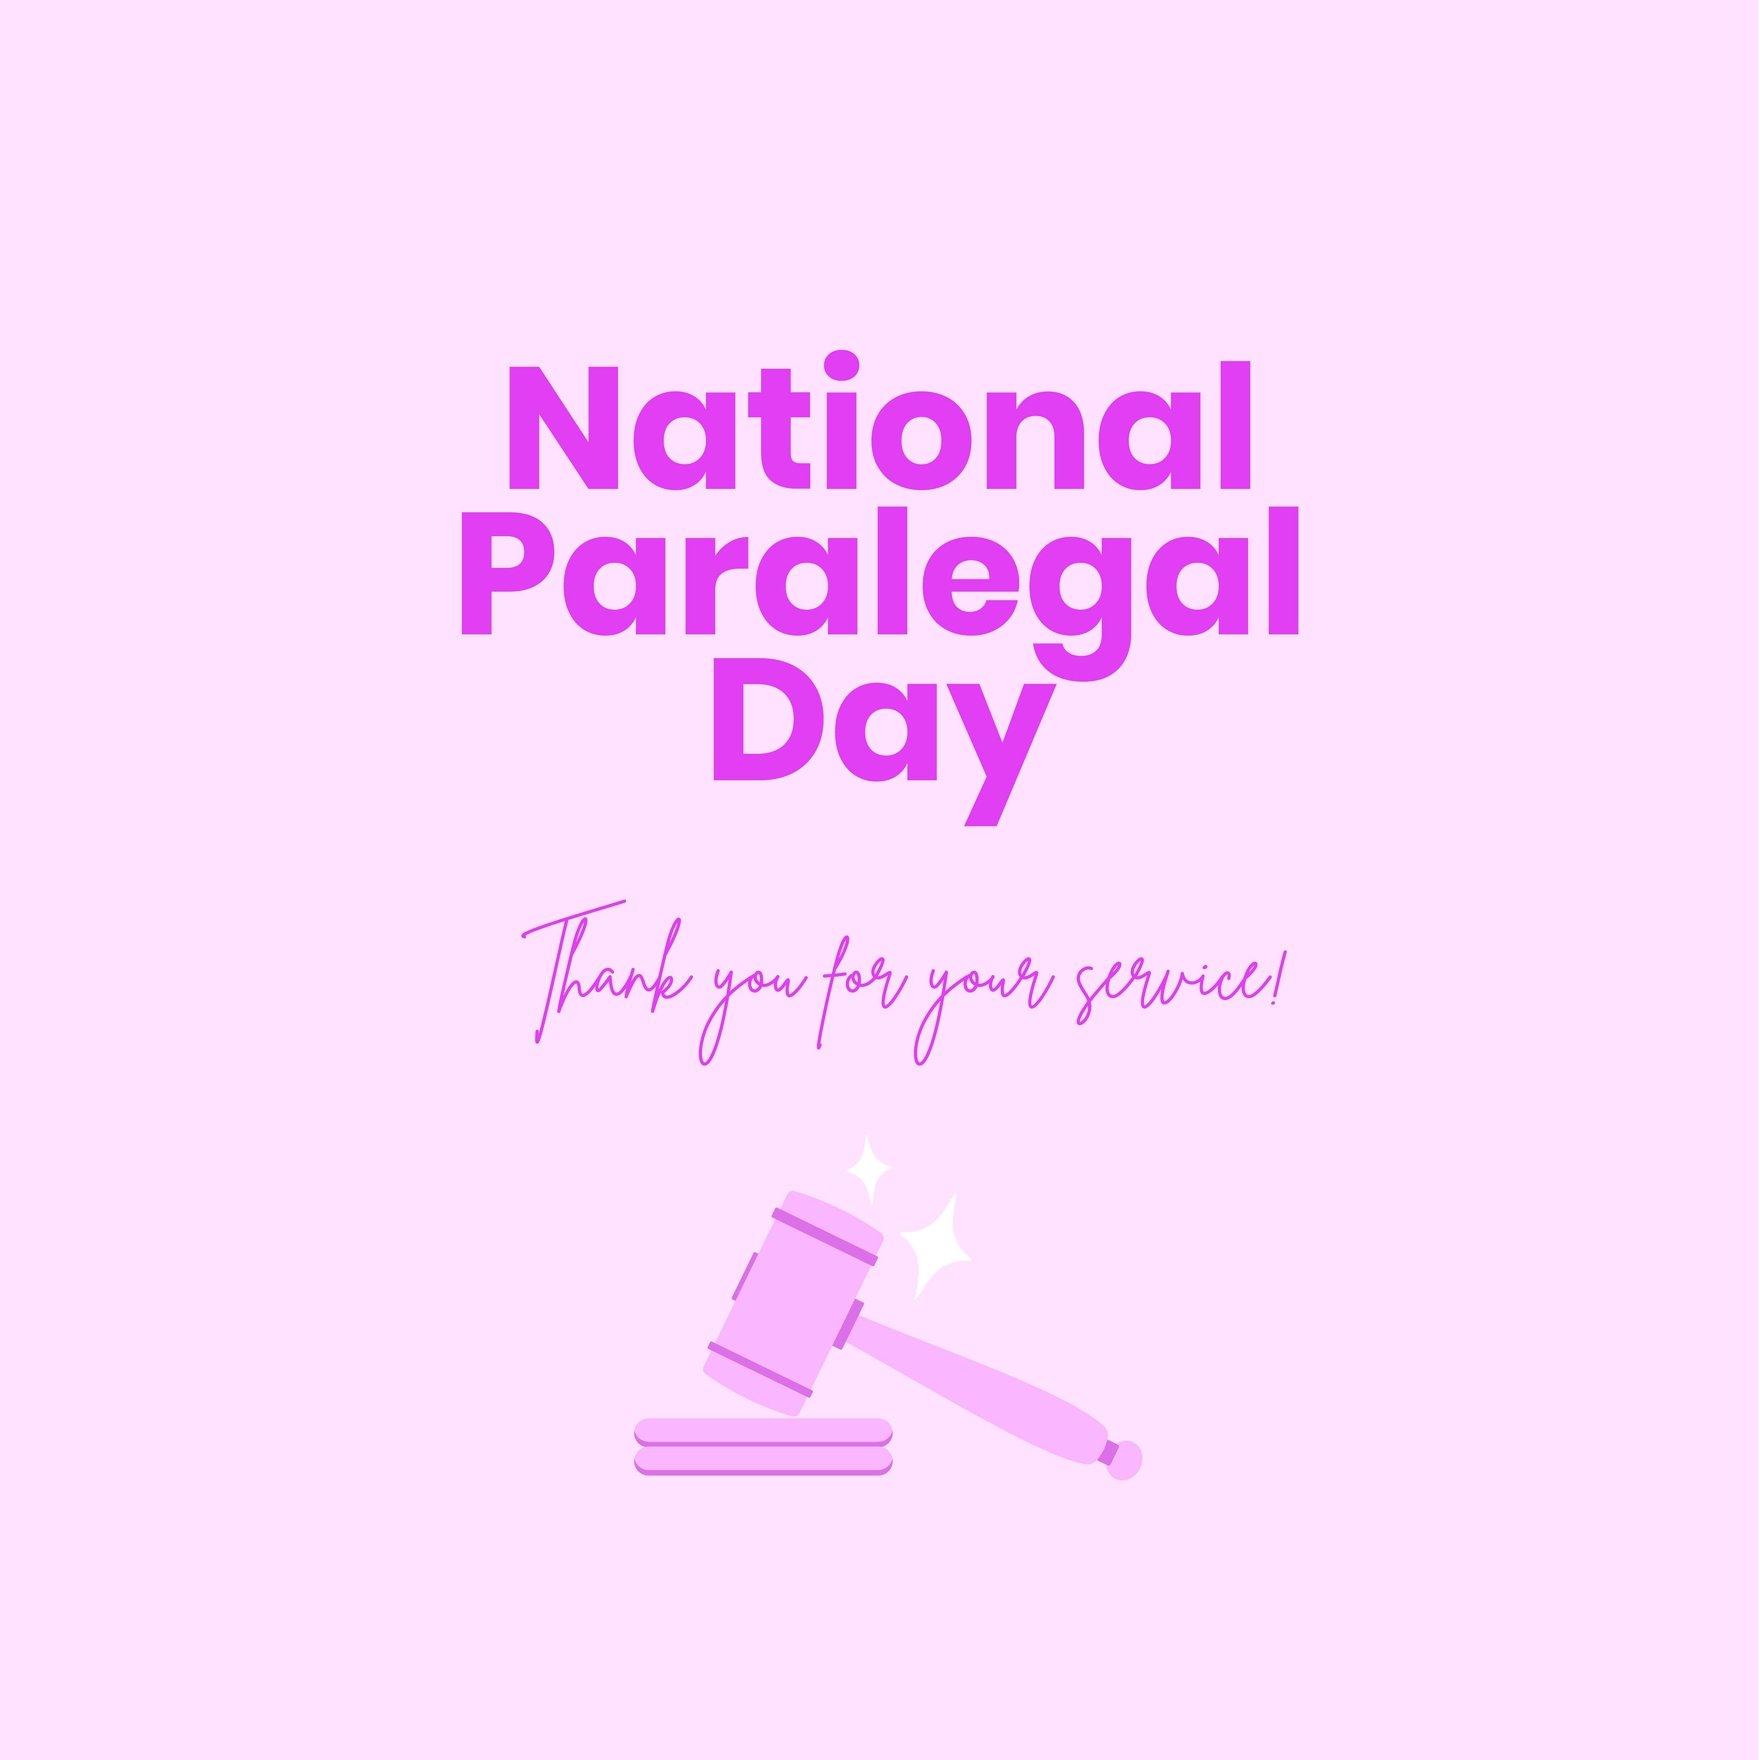 National Paralegal Day Instagram Post